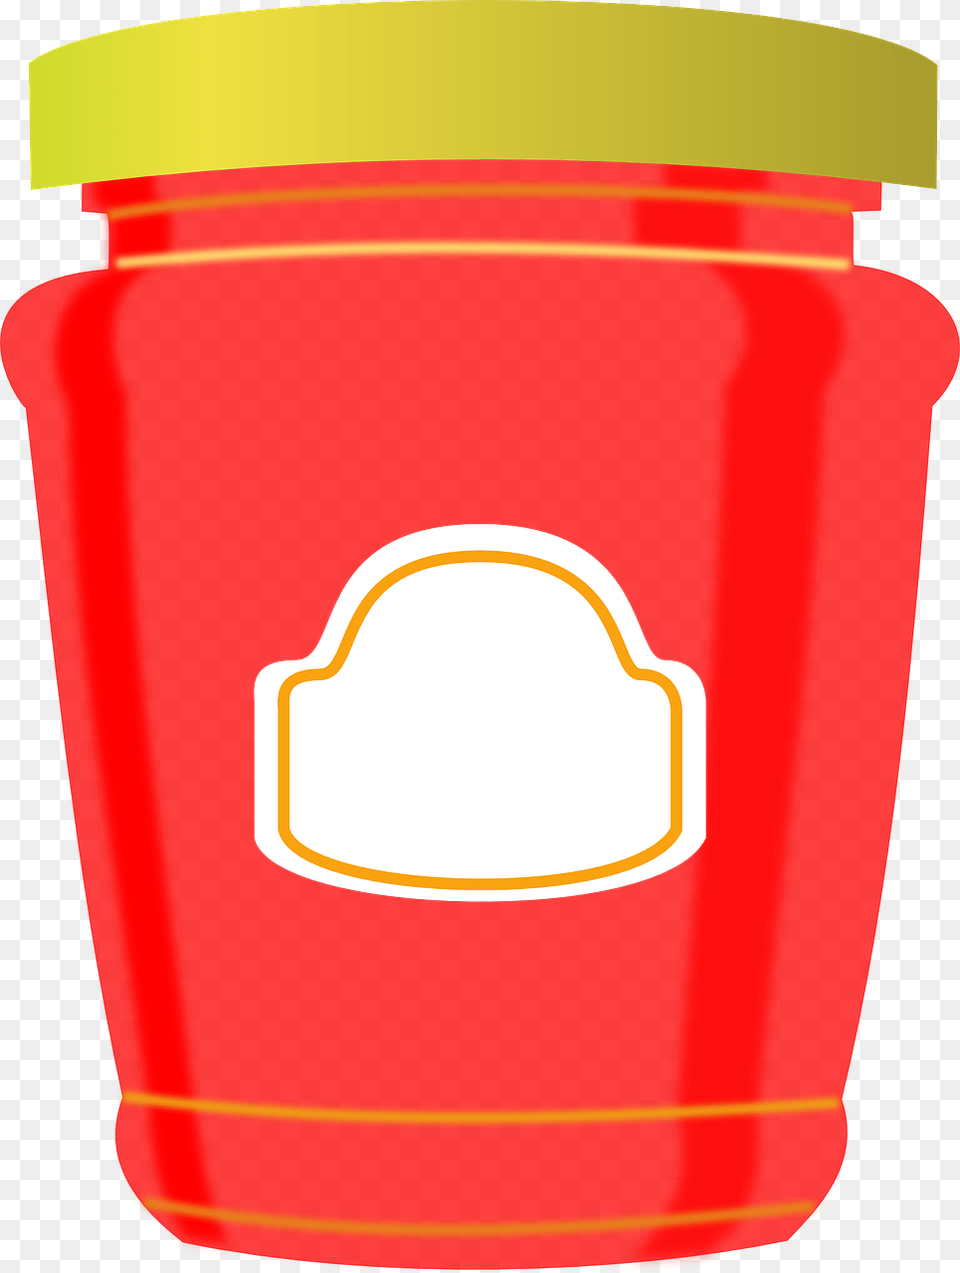 Jar Jam Jelly Plain Food Breakfast French Glass Free Transparent Png